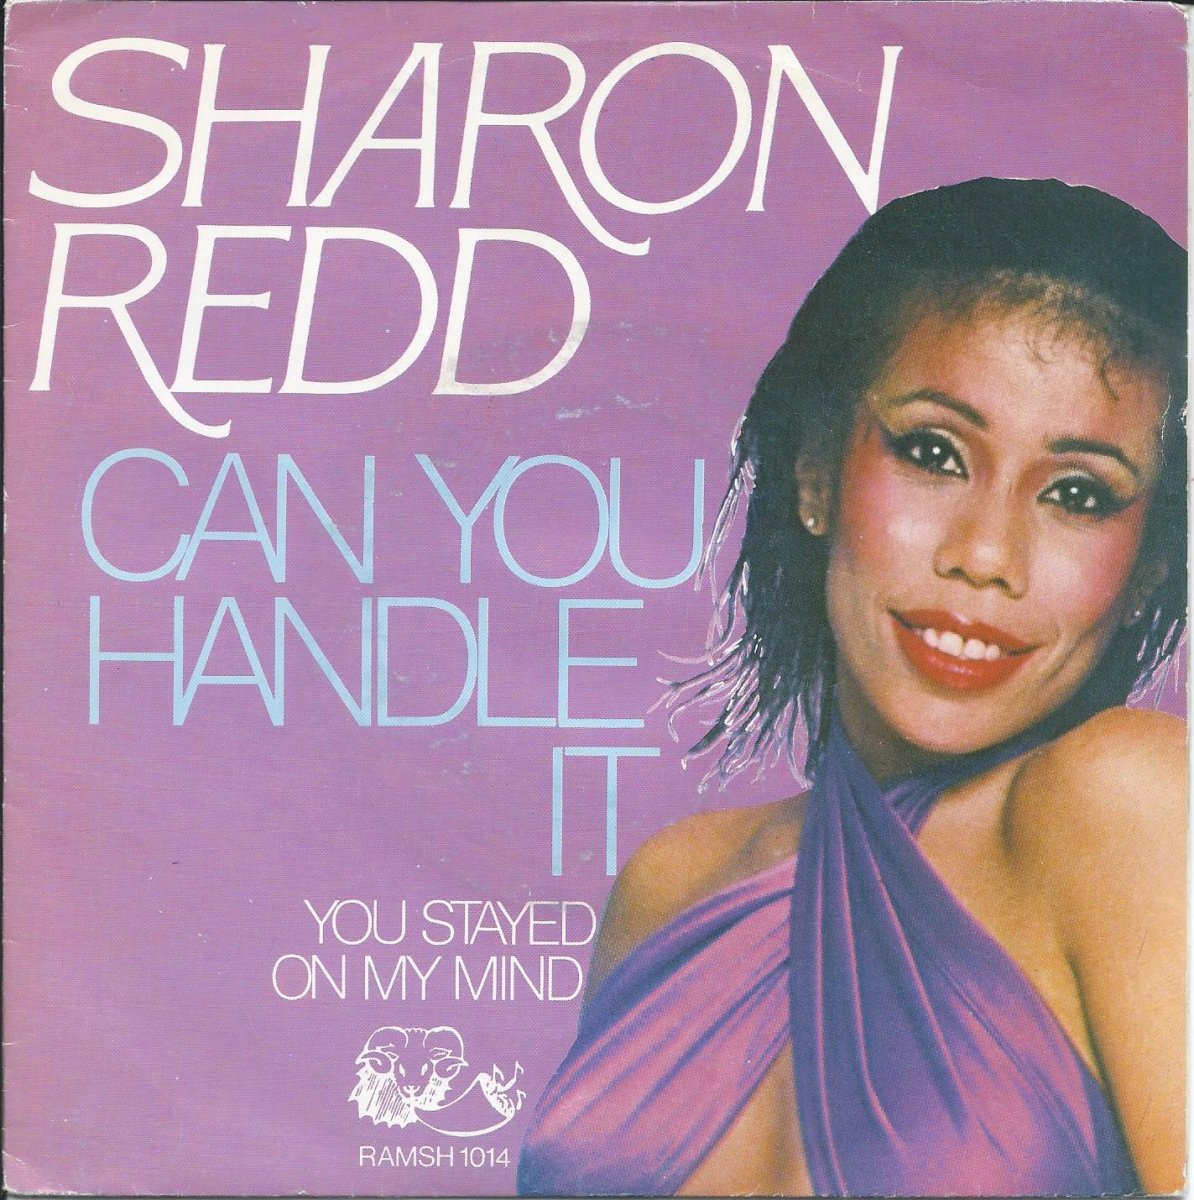 SHARON REDD / CAN YOU HANDLE IT / YOU STAYED ON MY MIND (7